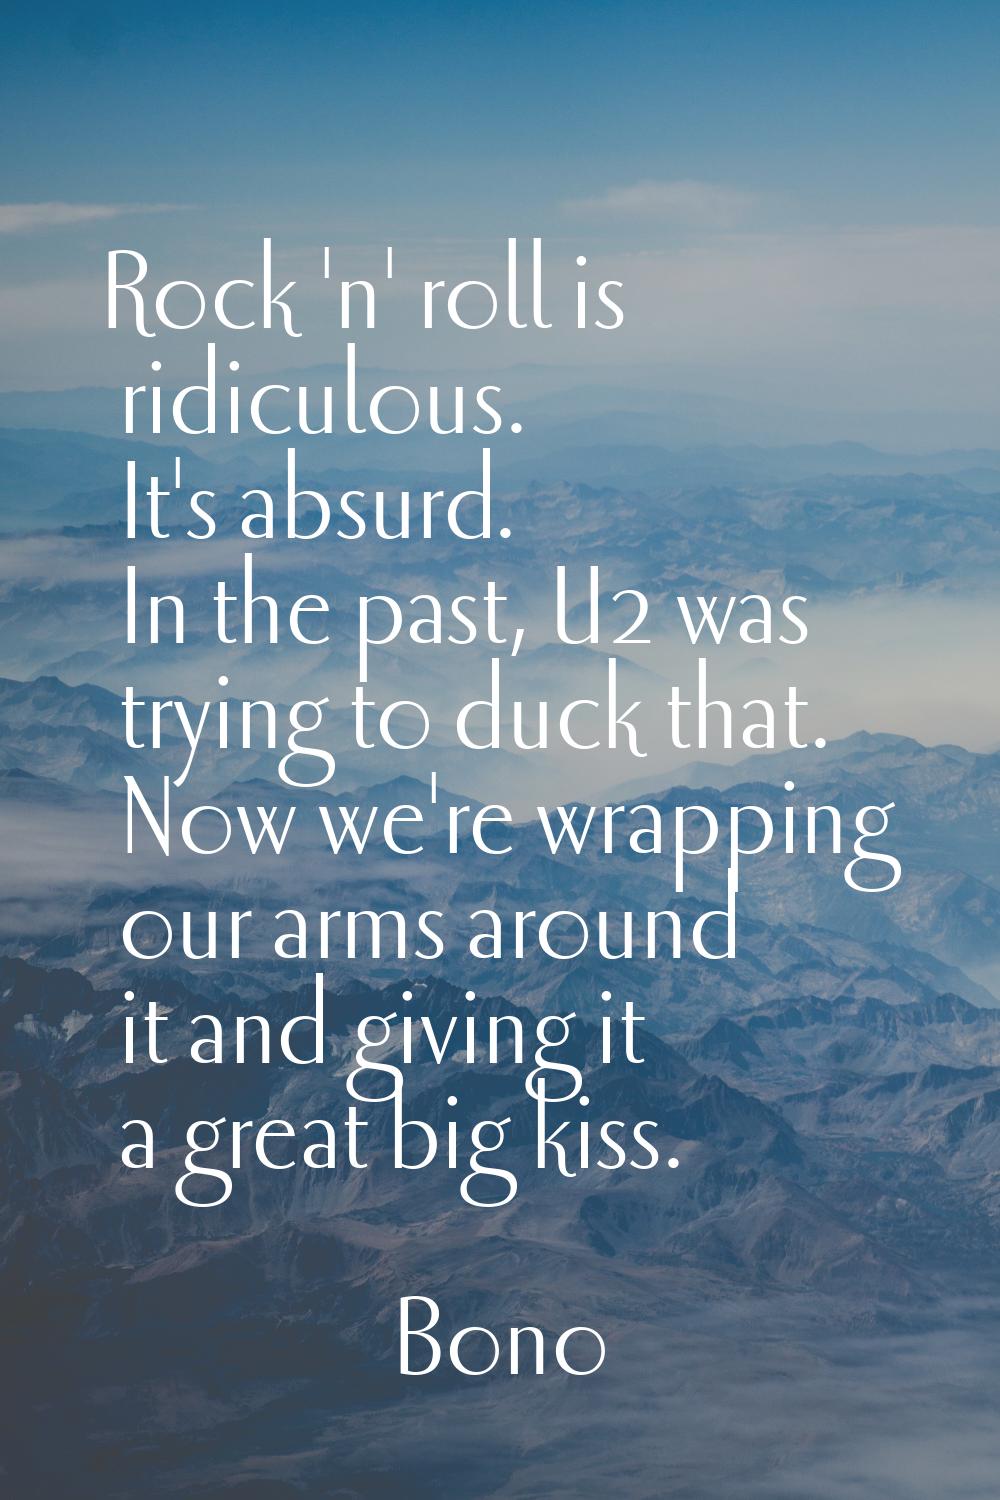 Rock 'n' roll is ridiculous. It's absurd. In the past, U2 was trying to duck that. Now we're wrappi